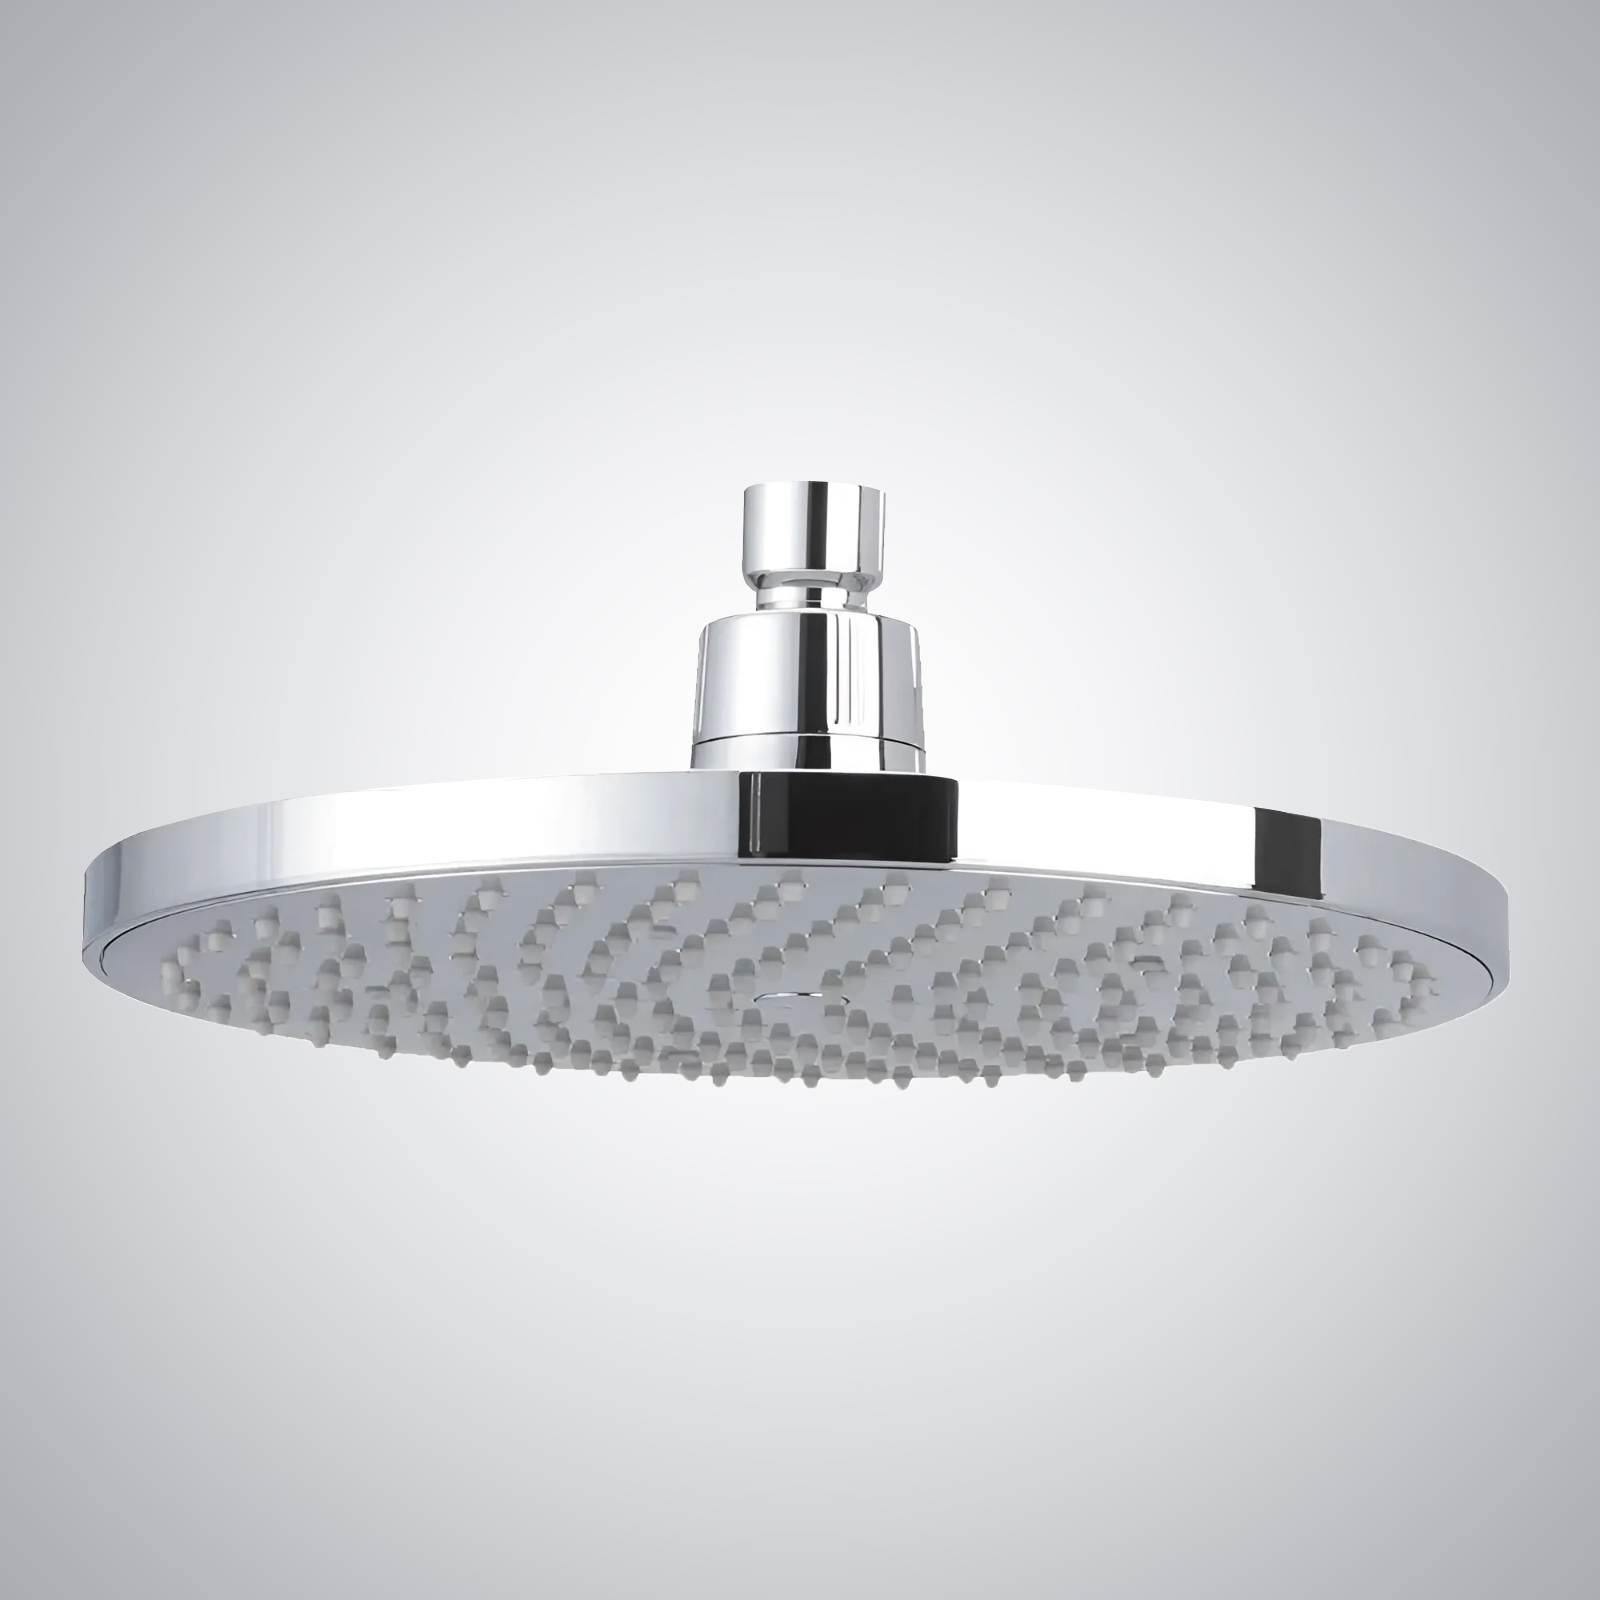 Fontana Dax Round Rain Shower Head with MasterClean Spray Face in Polished Chrome Finish